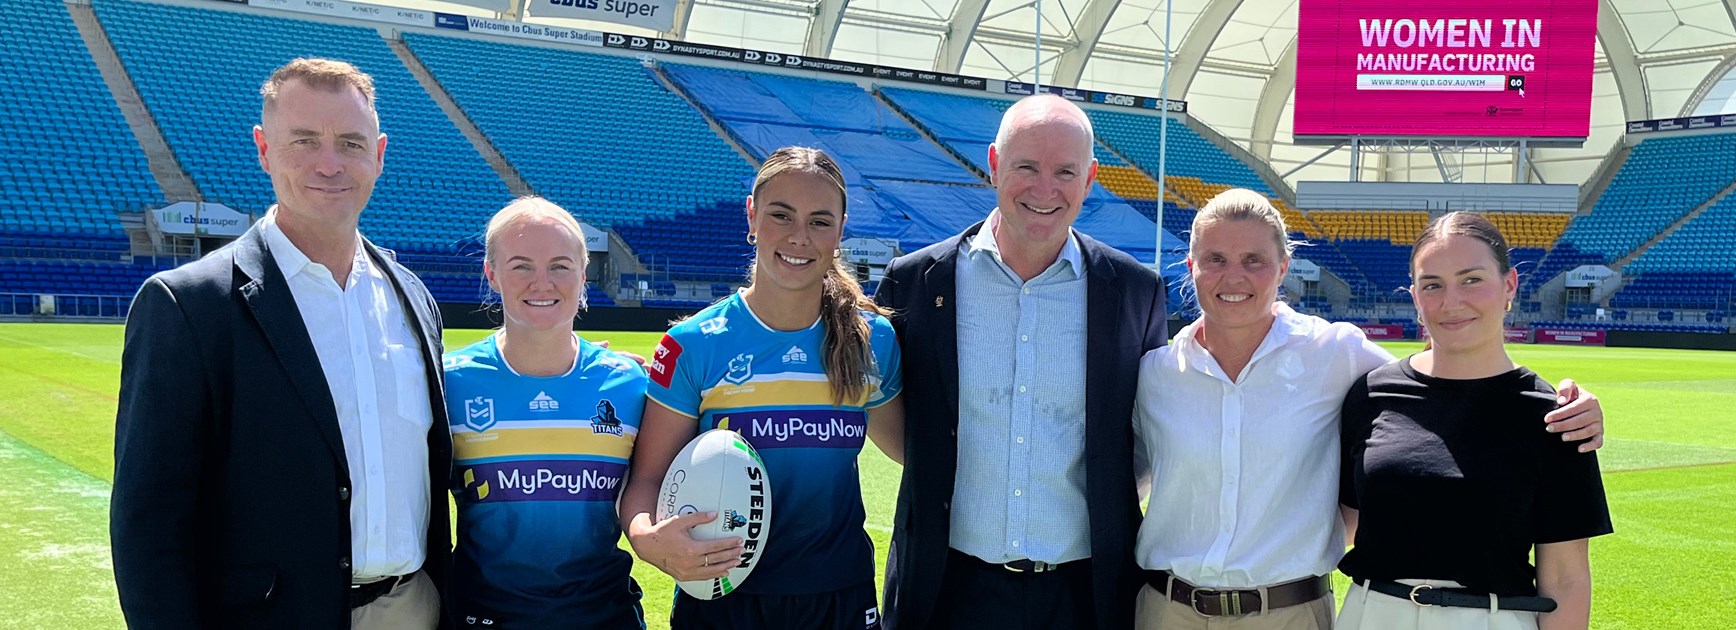 Titans NRLW team backing Women in Manufacturing to inspire young apprentices